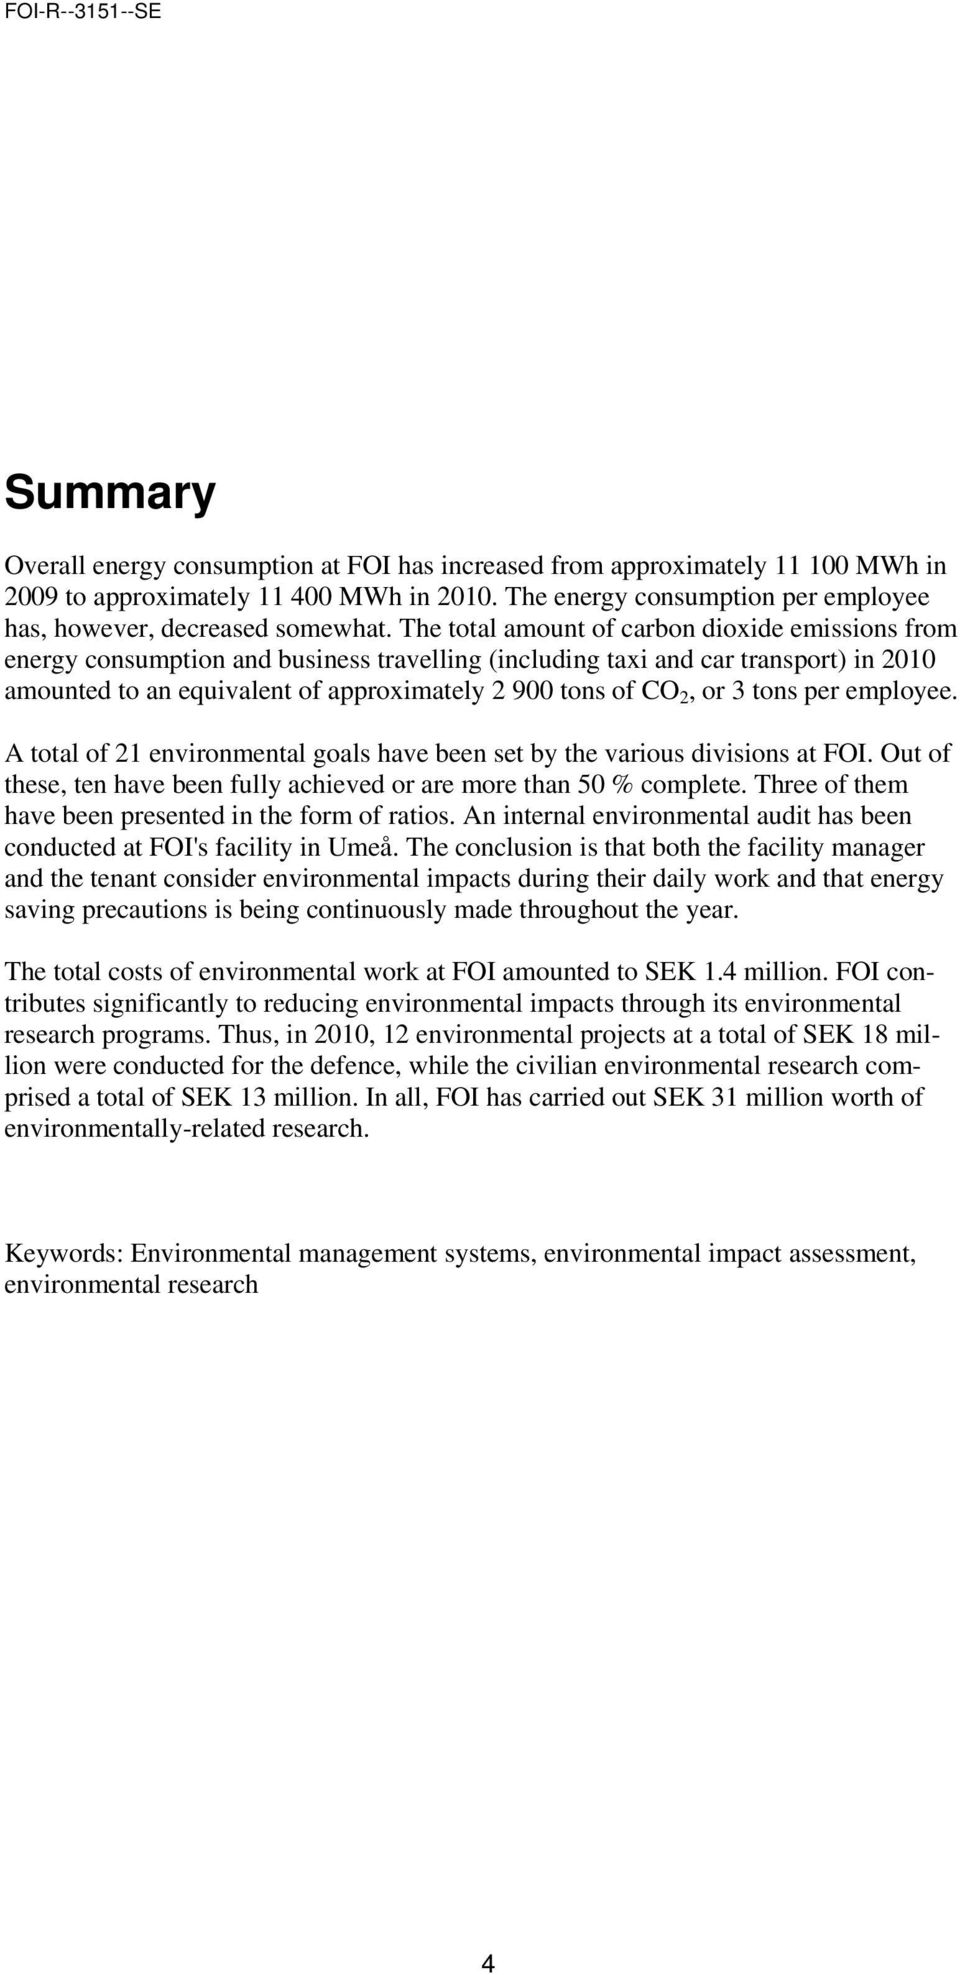 or 3 tons per employee. A total of 21 environmental goals have been set by the various divisions at FOI. Out of these, ten have been fully achieved or are more than 50 % complete.